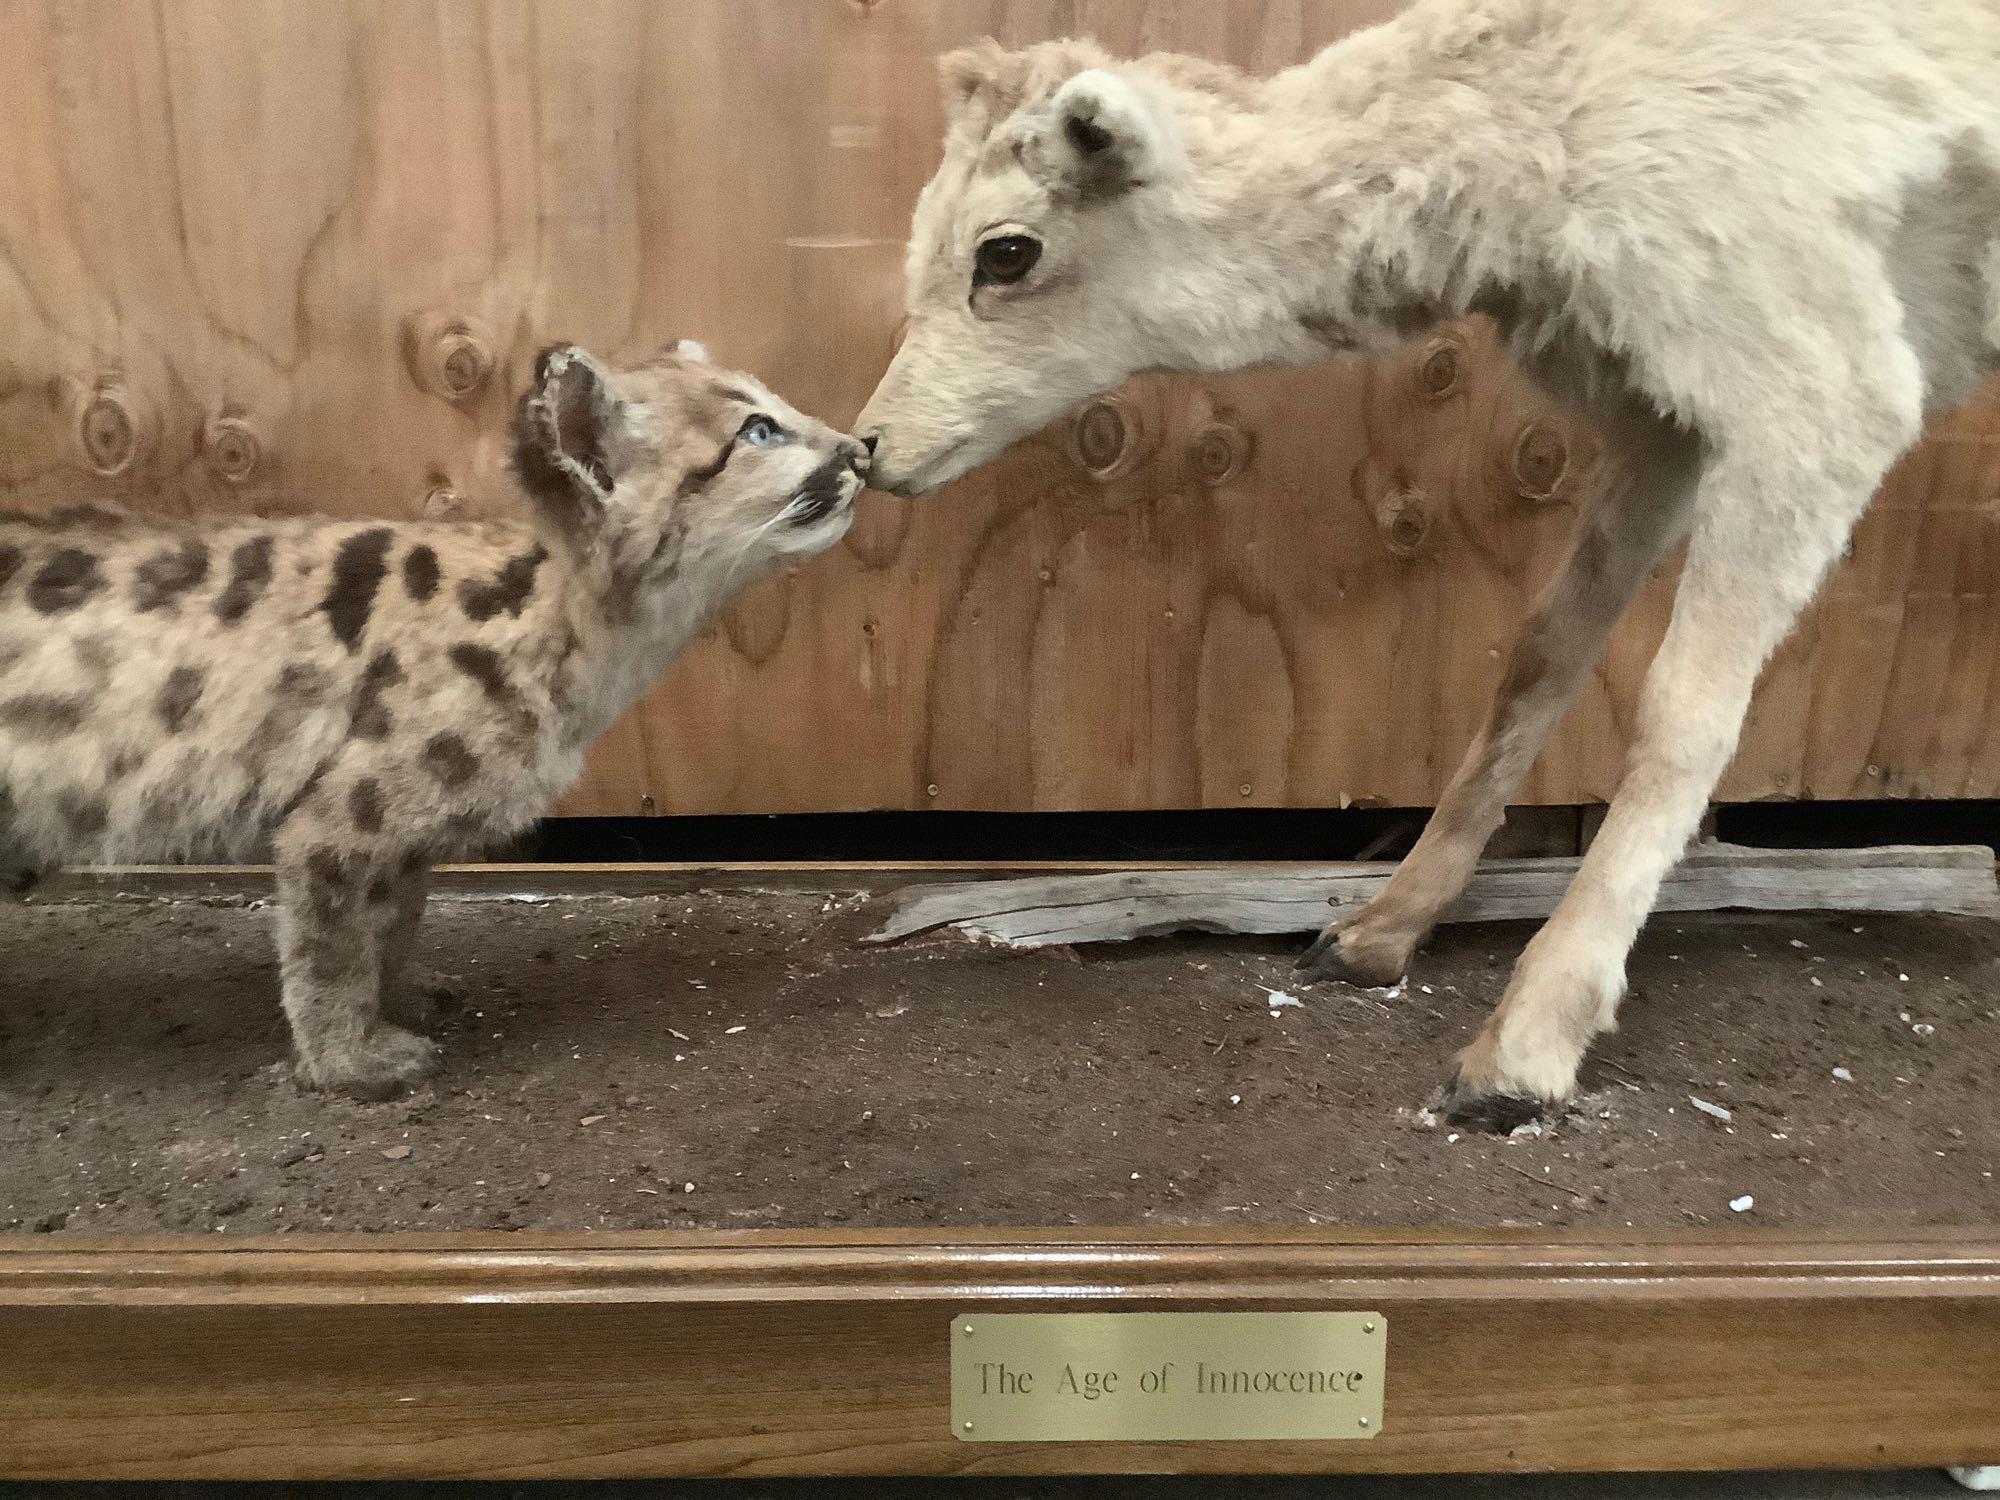 "The Age of Innocence" taxidermy display of a baby wildcat meeting a baby goat